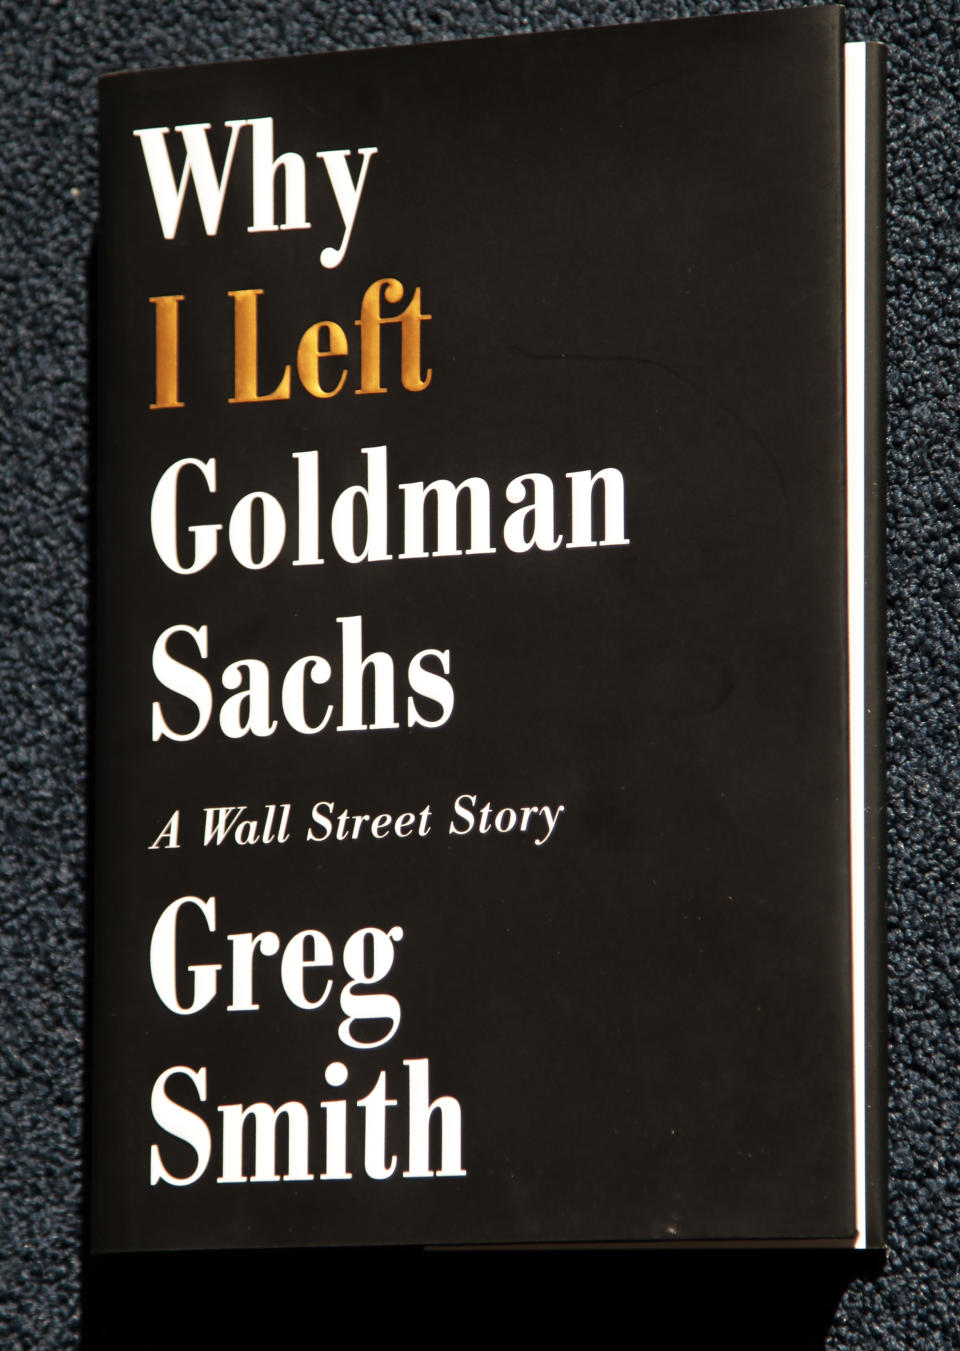 Greg Smith's new book "Why I Left Goldman Sachs, is photographed, Monday, Oct. 22, 2012, in New York. Smith was a vice president at Goldman Sachs until March when he announced his departure from the investment bank with a blistering editorial in The New York Times. (AP Photo/Bebeto Matthews)